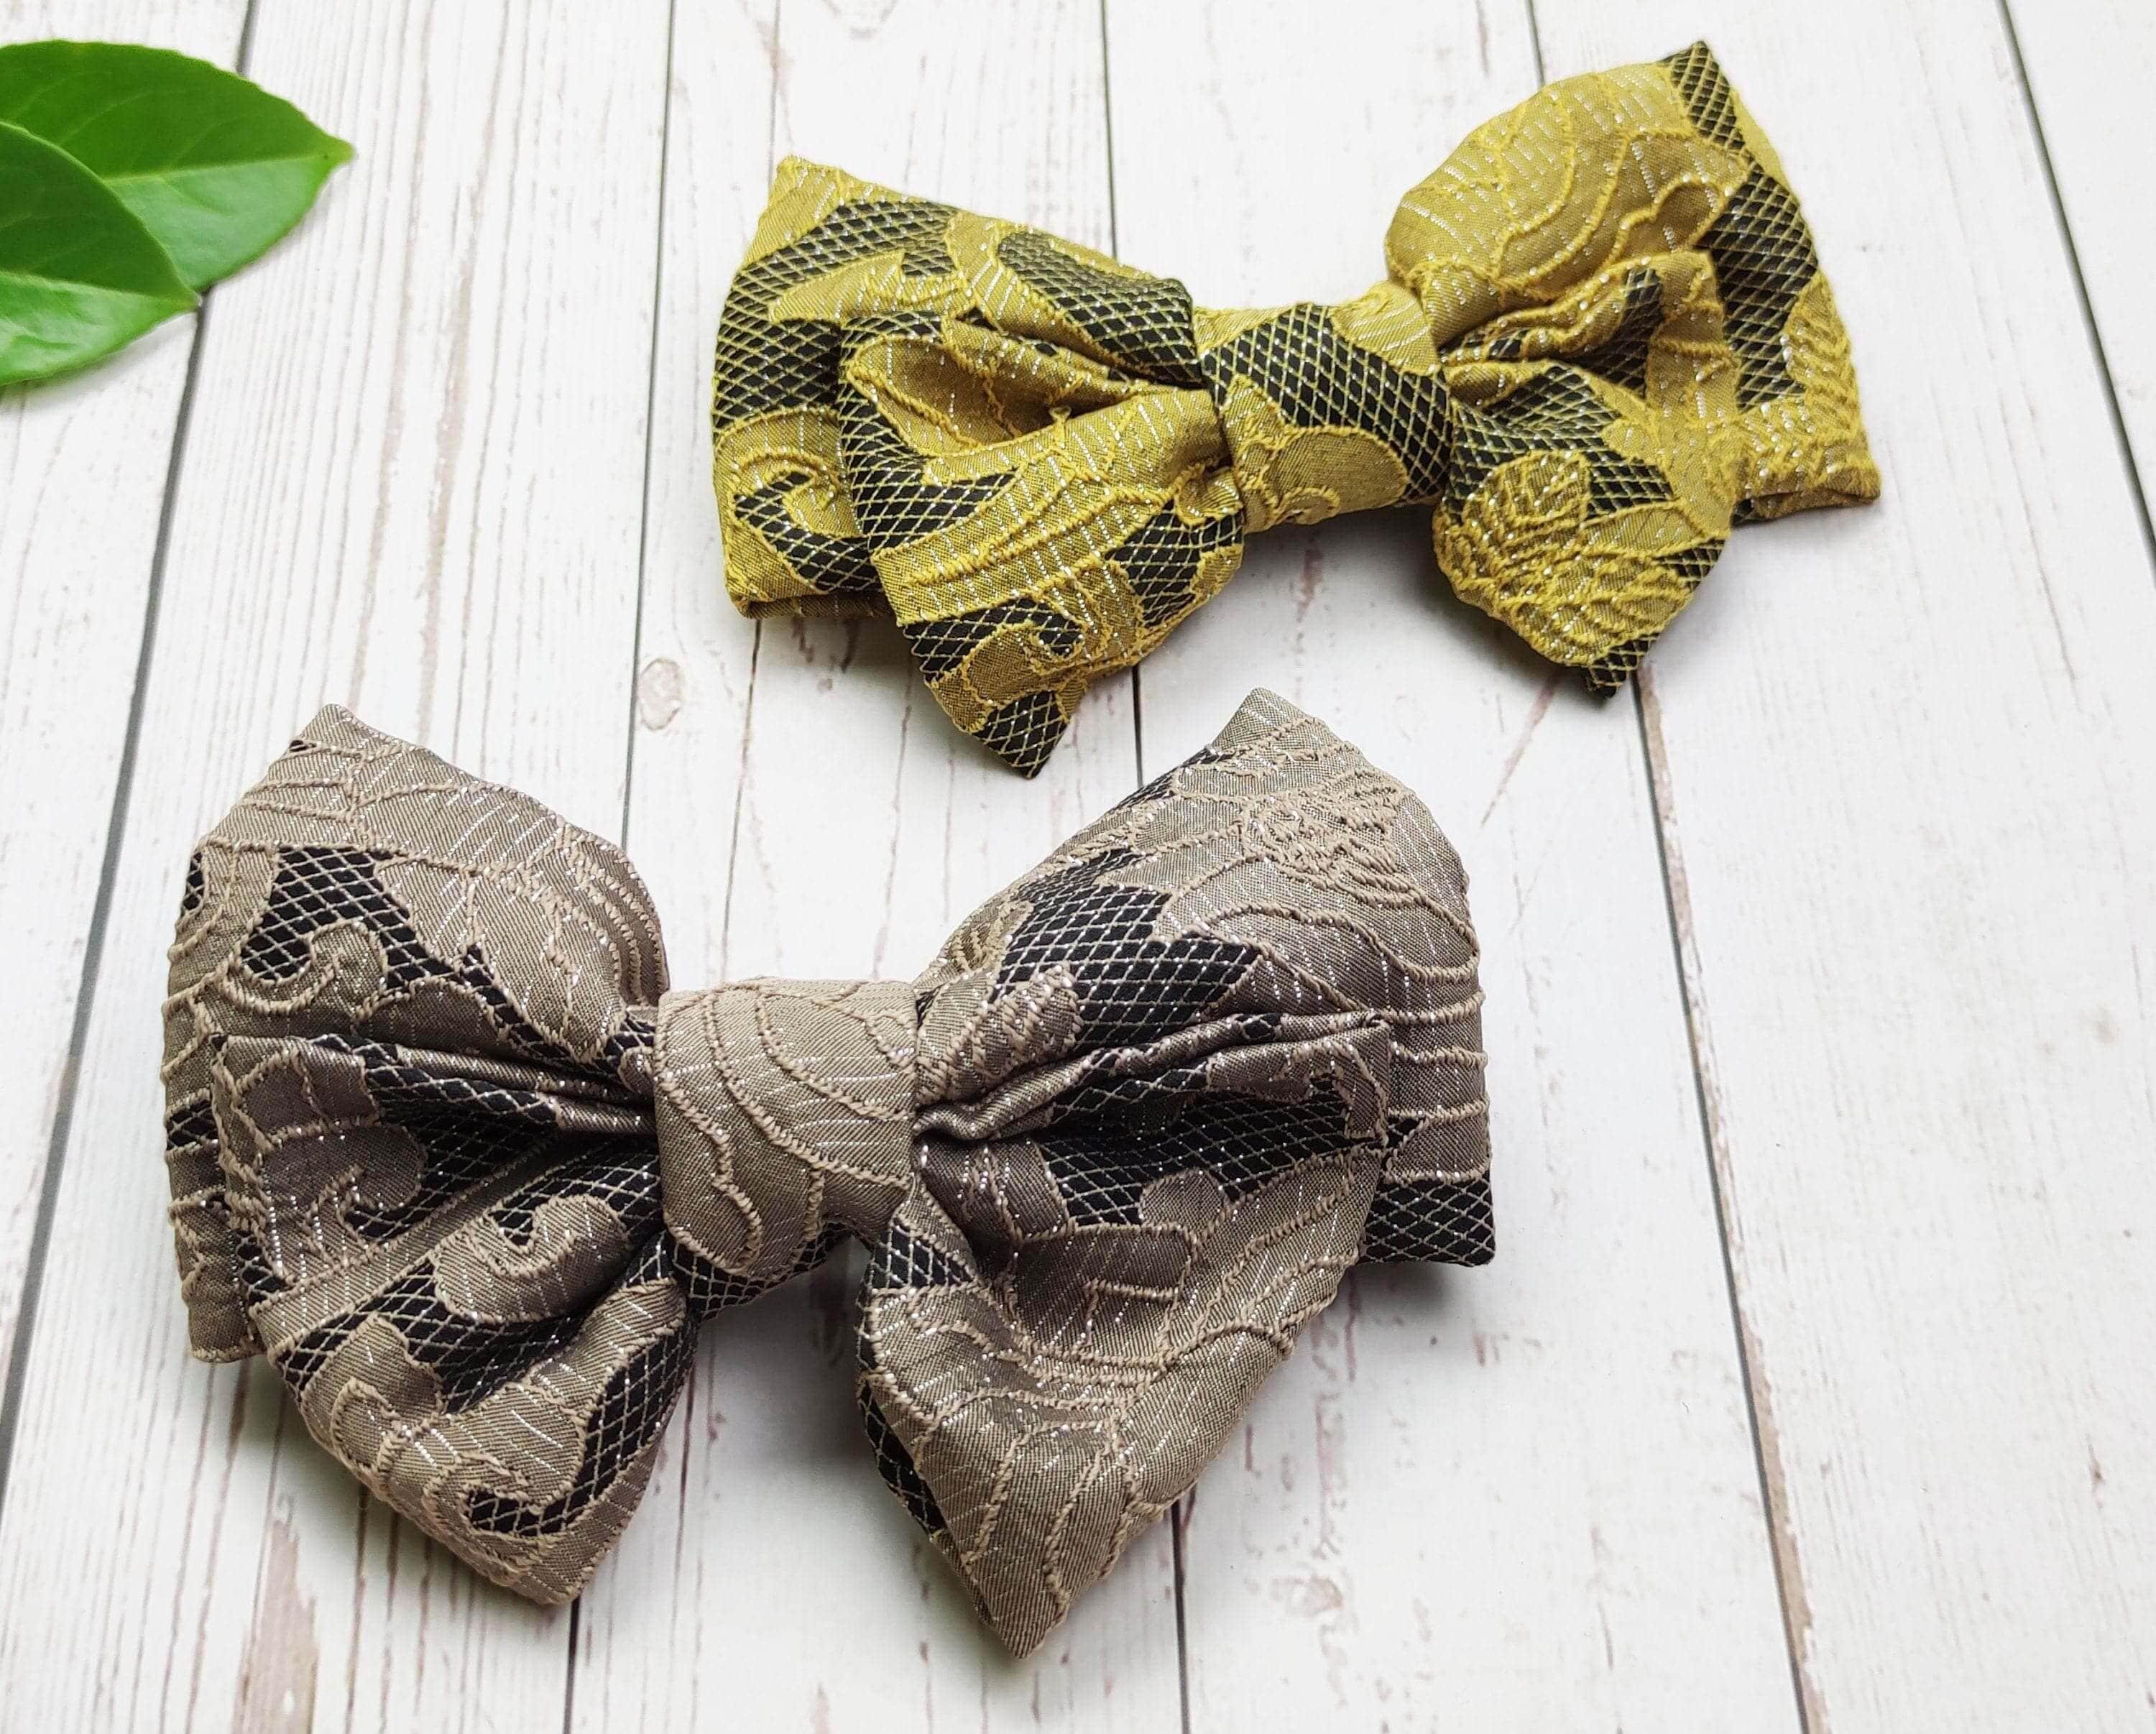 Handcrafted Handmade Guipure Lace Hair Clips with Bow - Mink and Yellow Color Hairpin, Fashionable Hair Accessory and Hair Bow Clasp available at Moyoni Design